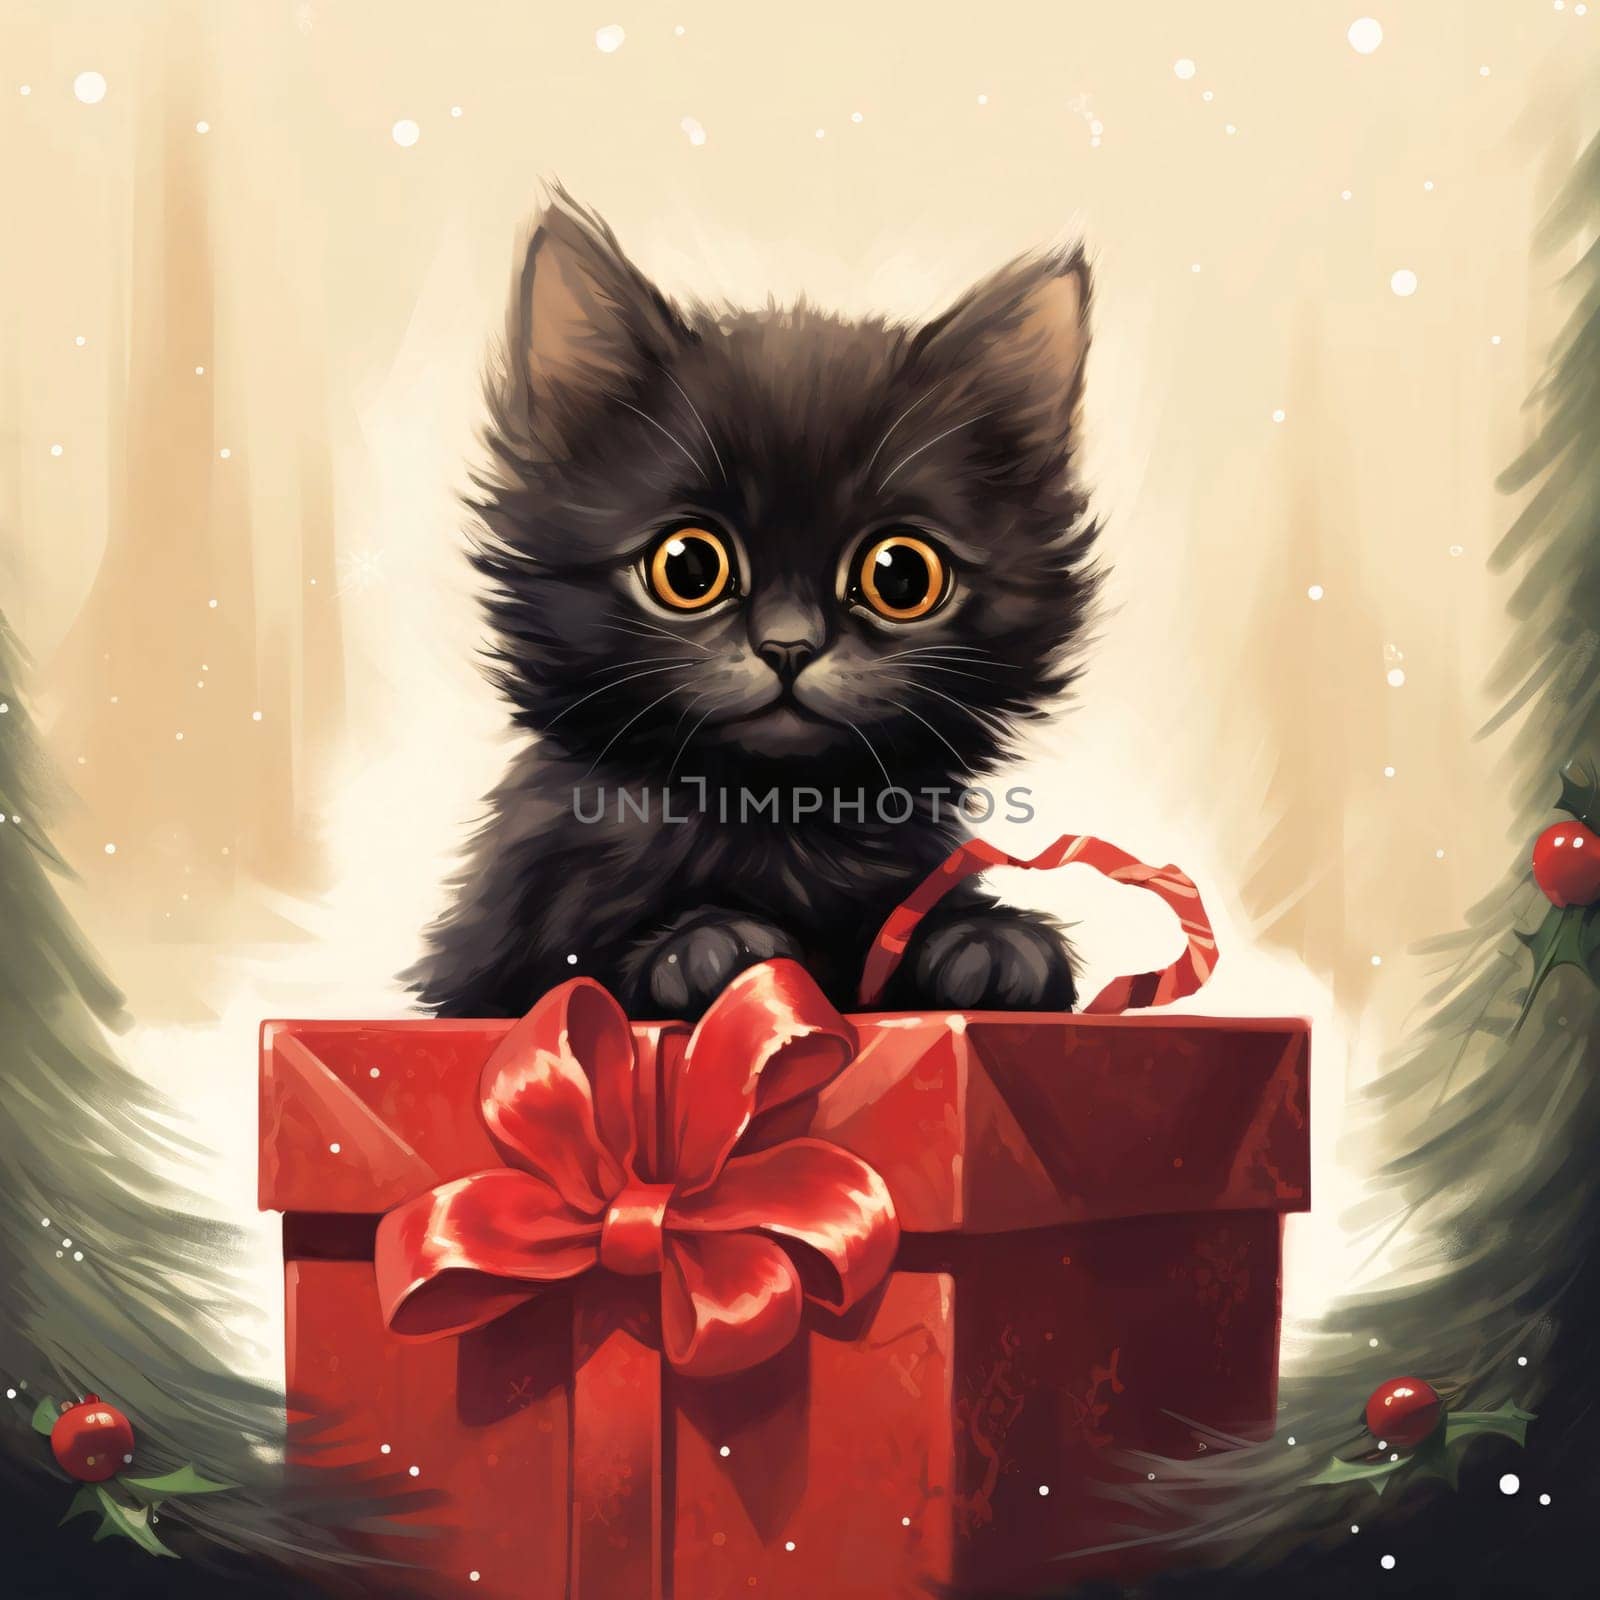 Tiny black cat in a red box, a gift with bows. Gifts as a day symbol of present and love. by ThemesS